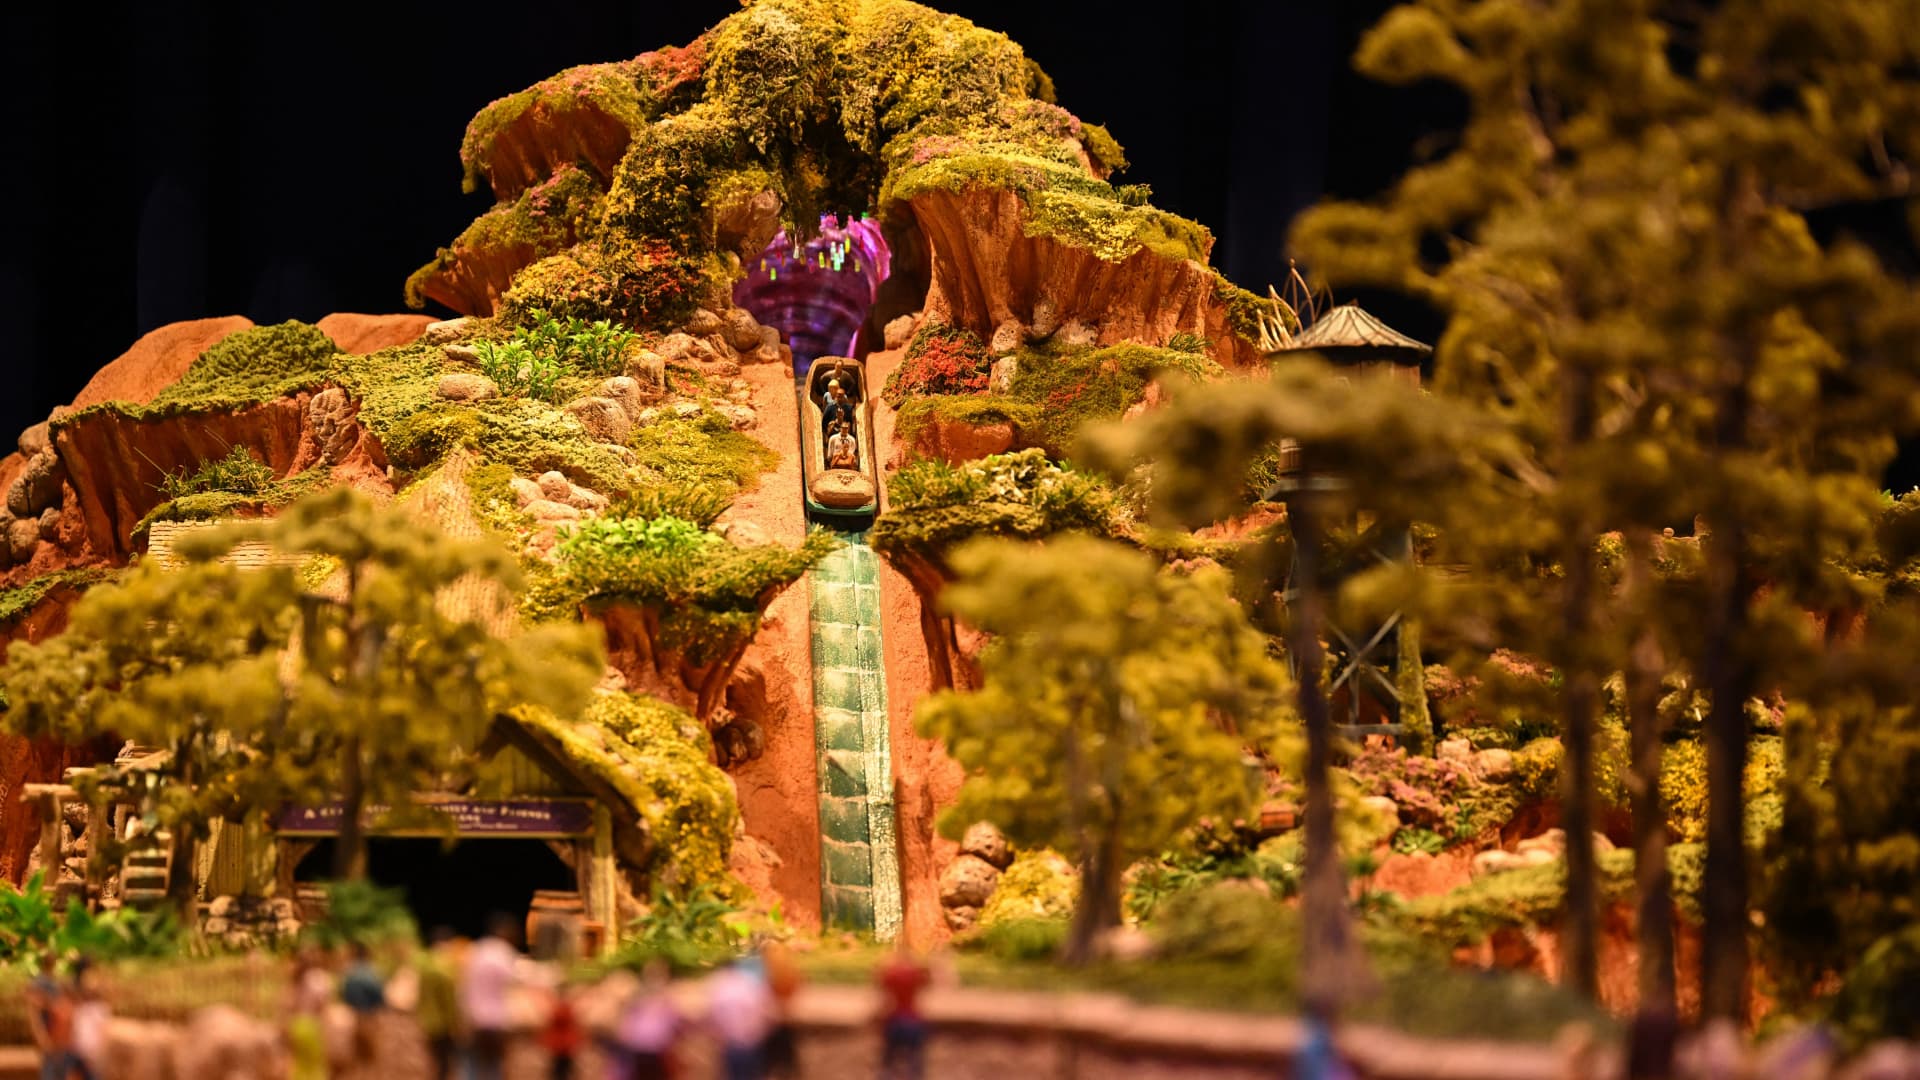 A model of Tiana's Bayou Adventure, which will reimagine Disneyland's Splash Mountain, is displayed during the Walt Disney D23 Expo in Anaheim, California on September 9, 2022.